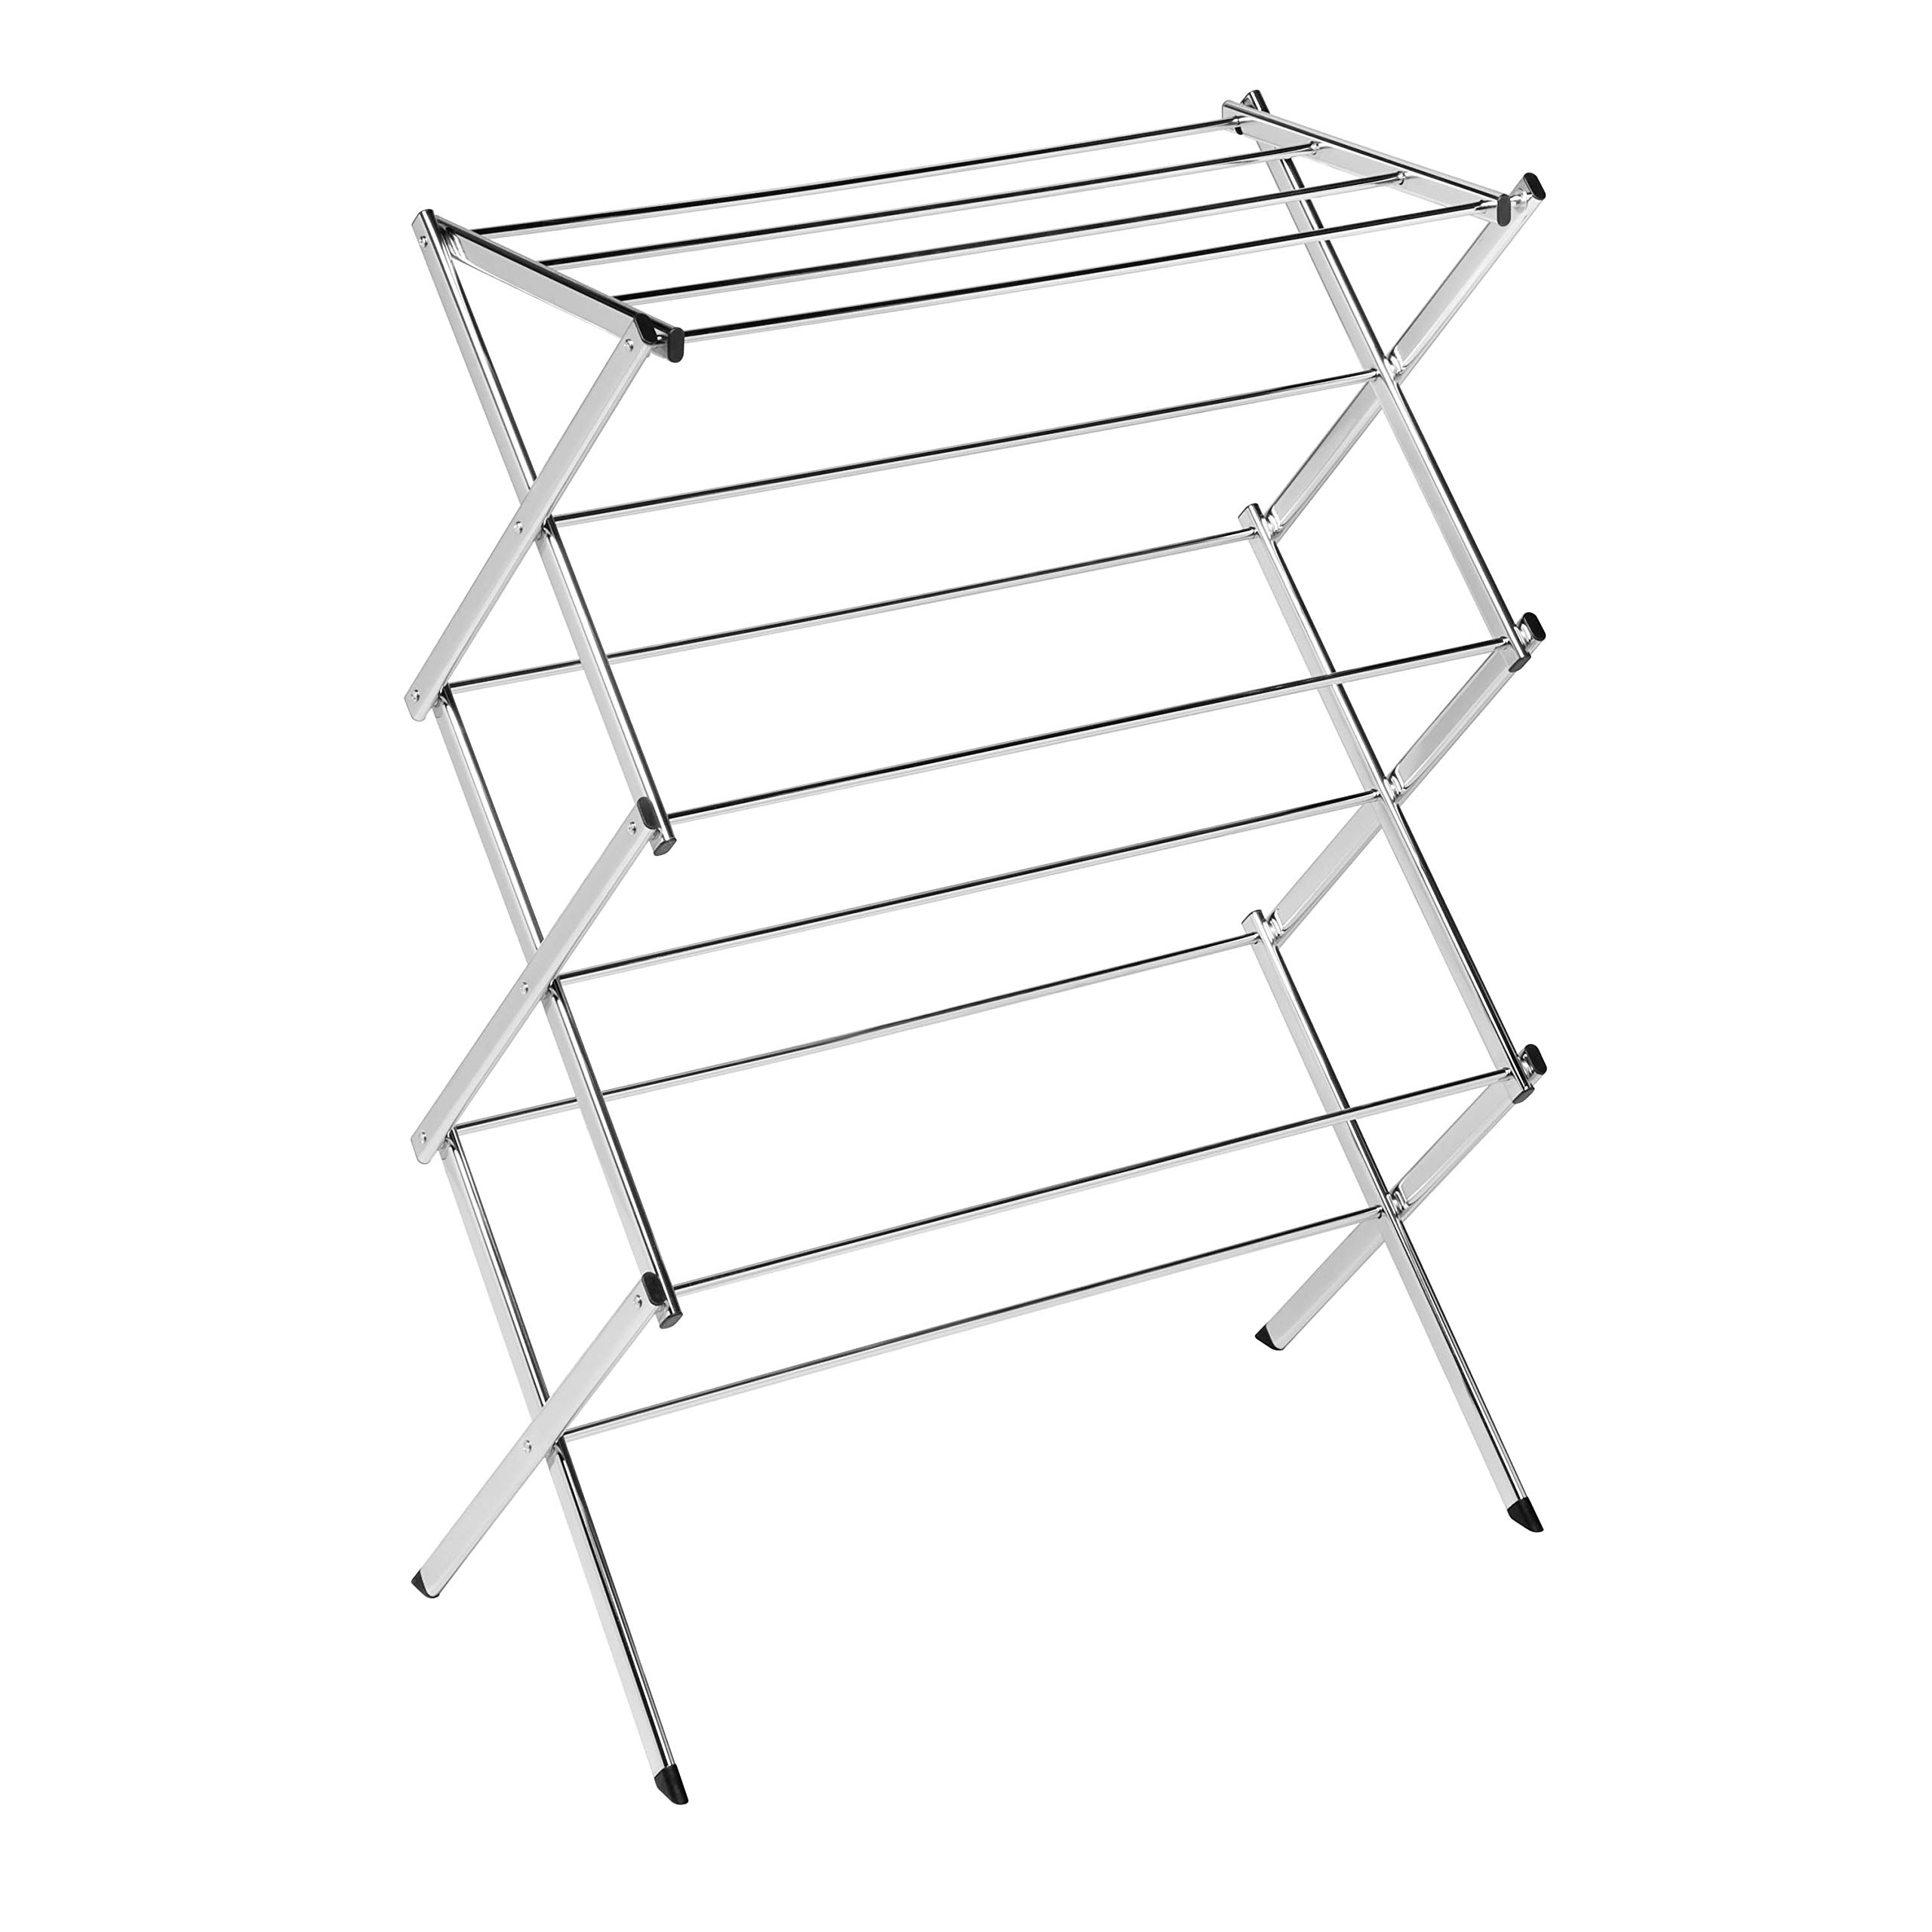 FaFurn - Commercial Clothes Drying Rack Laundry Dryer in Chrome